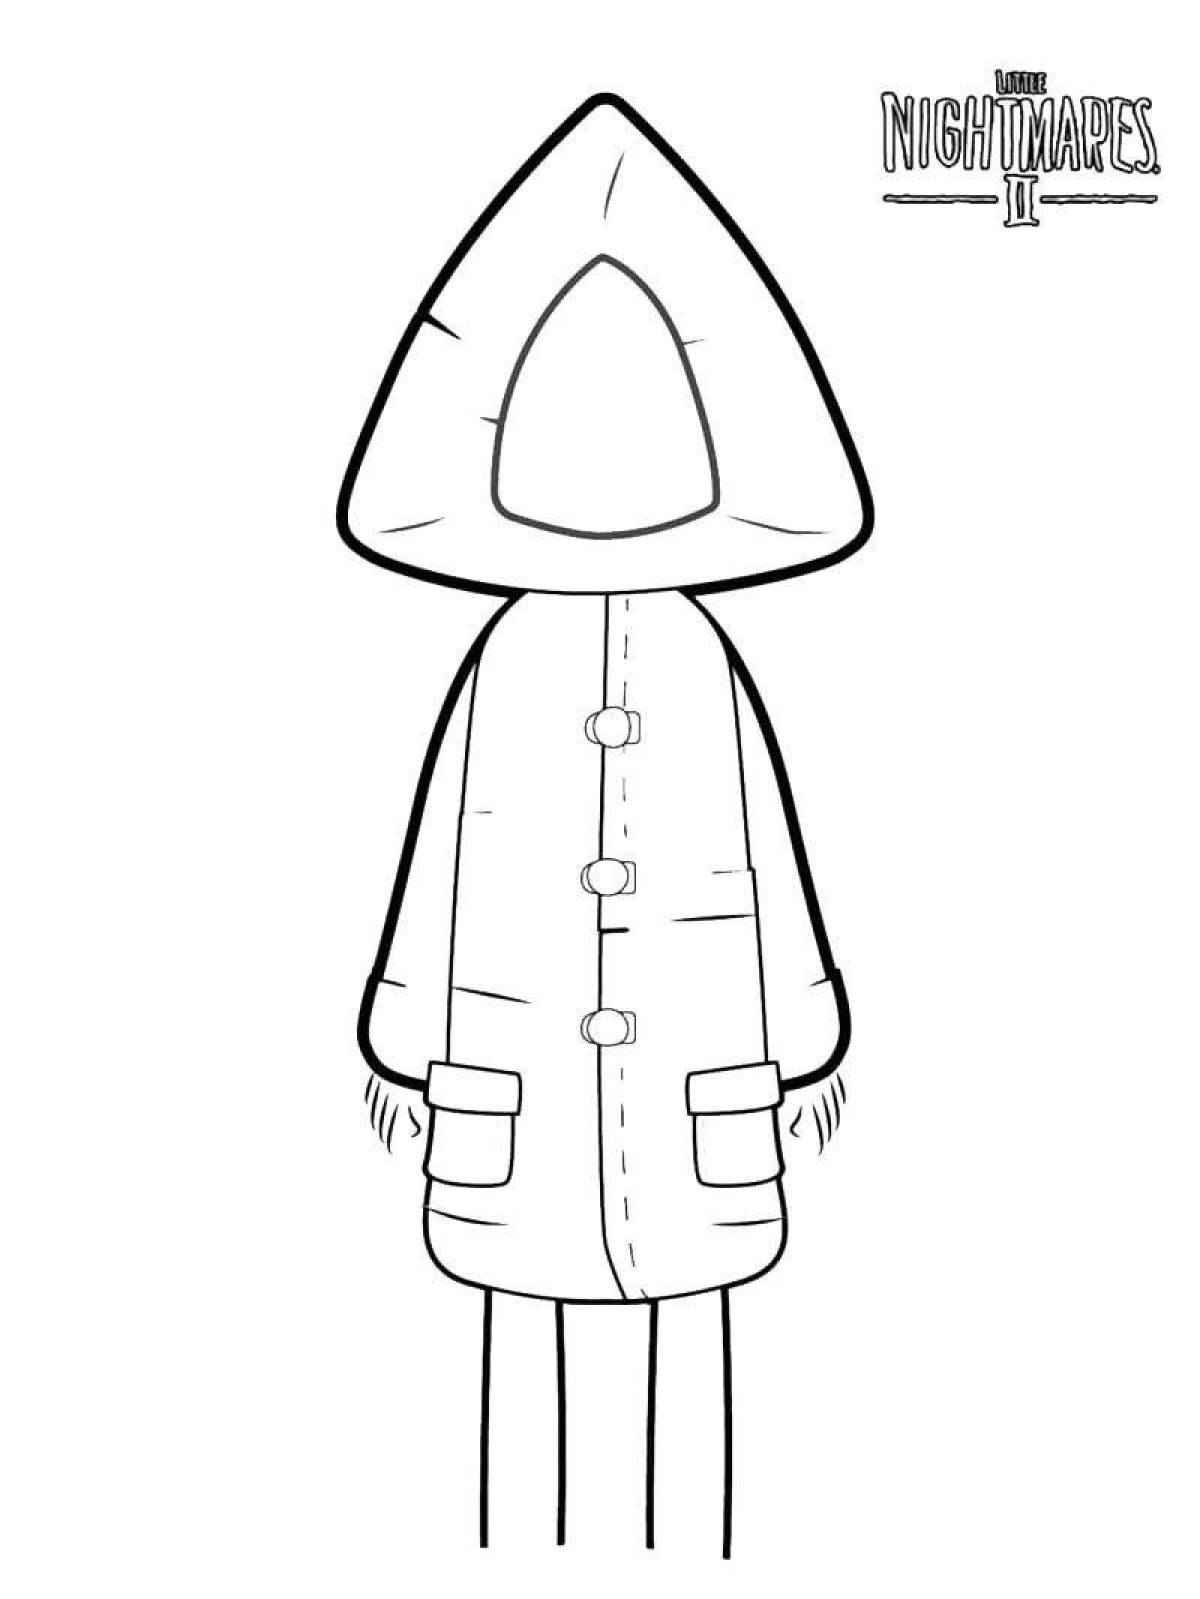 Playful little nightmares coloring page